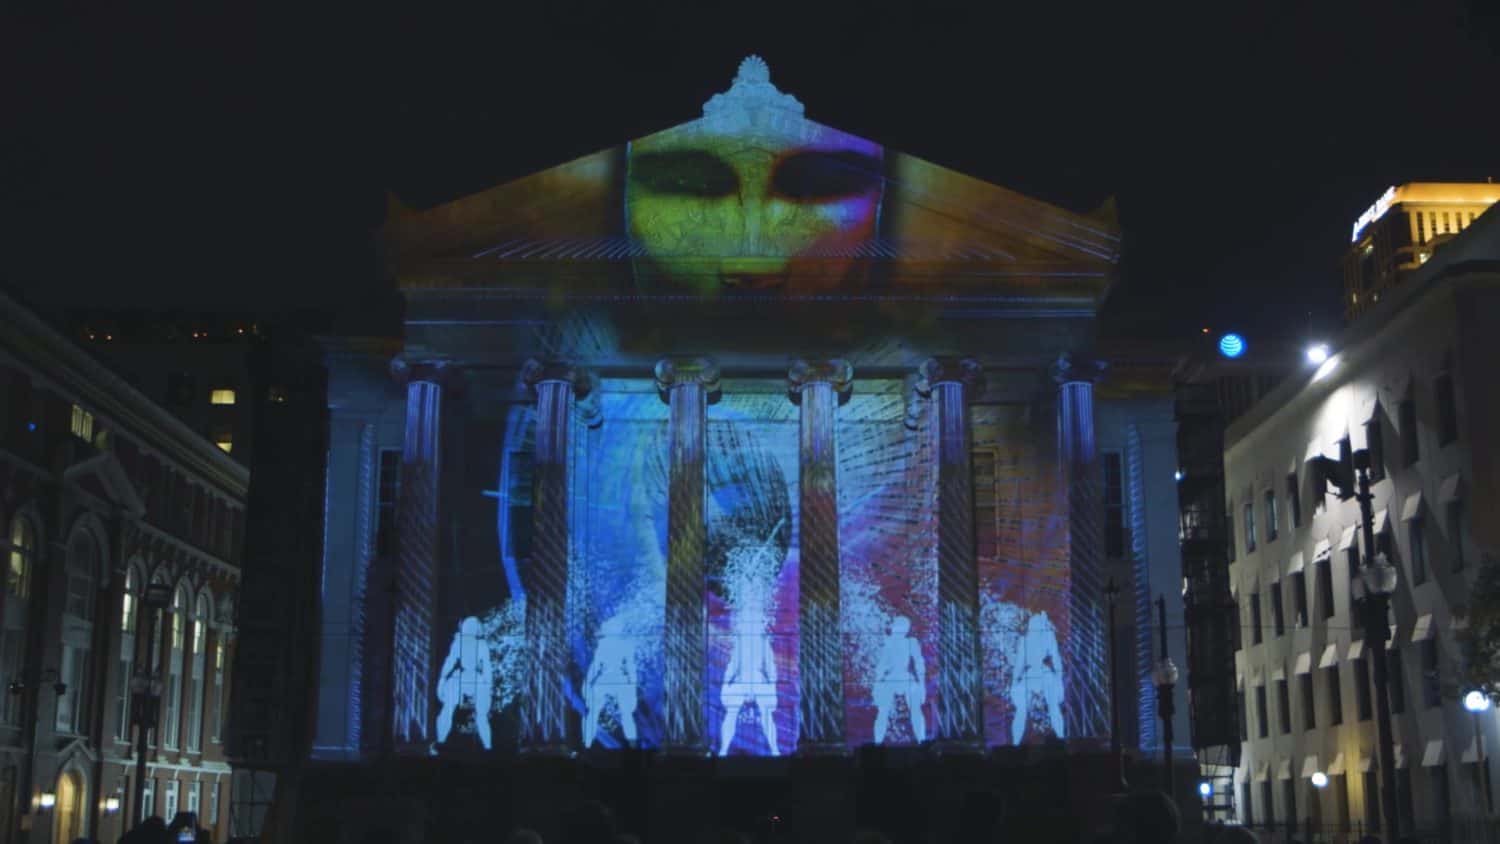 Colorful glow in the dark animation projected on Corinthian style old building at night in city